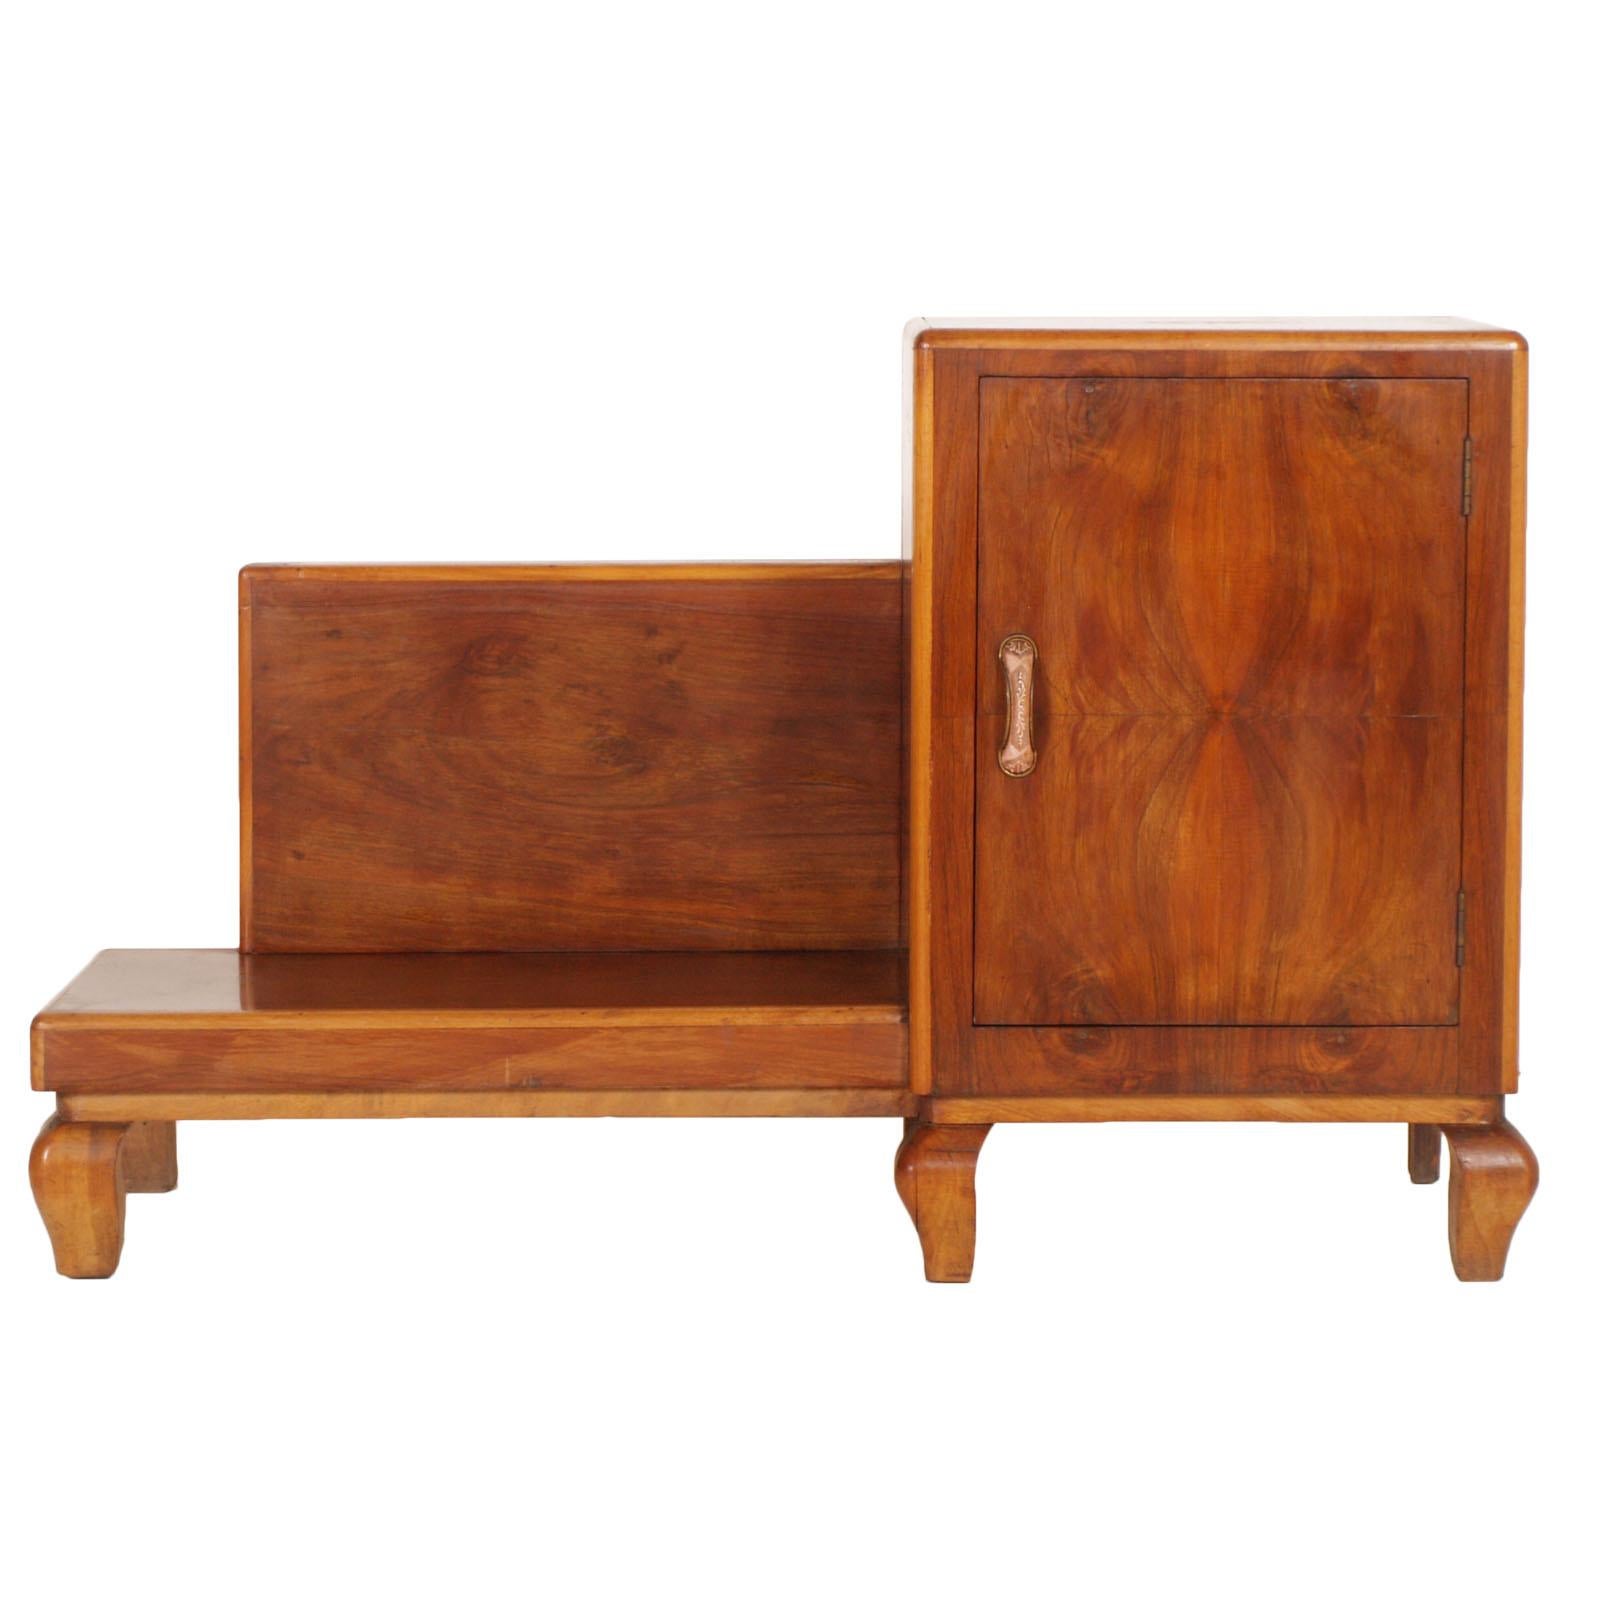 Art Deco Entrance Cabinet, Console in Walnut Restored and Published to Wax